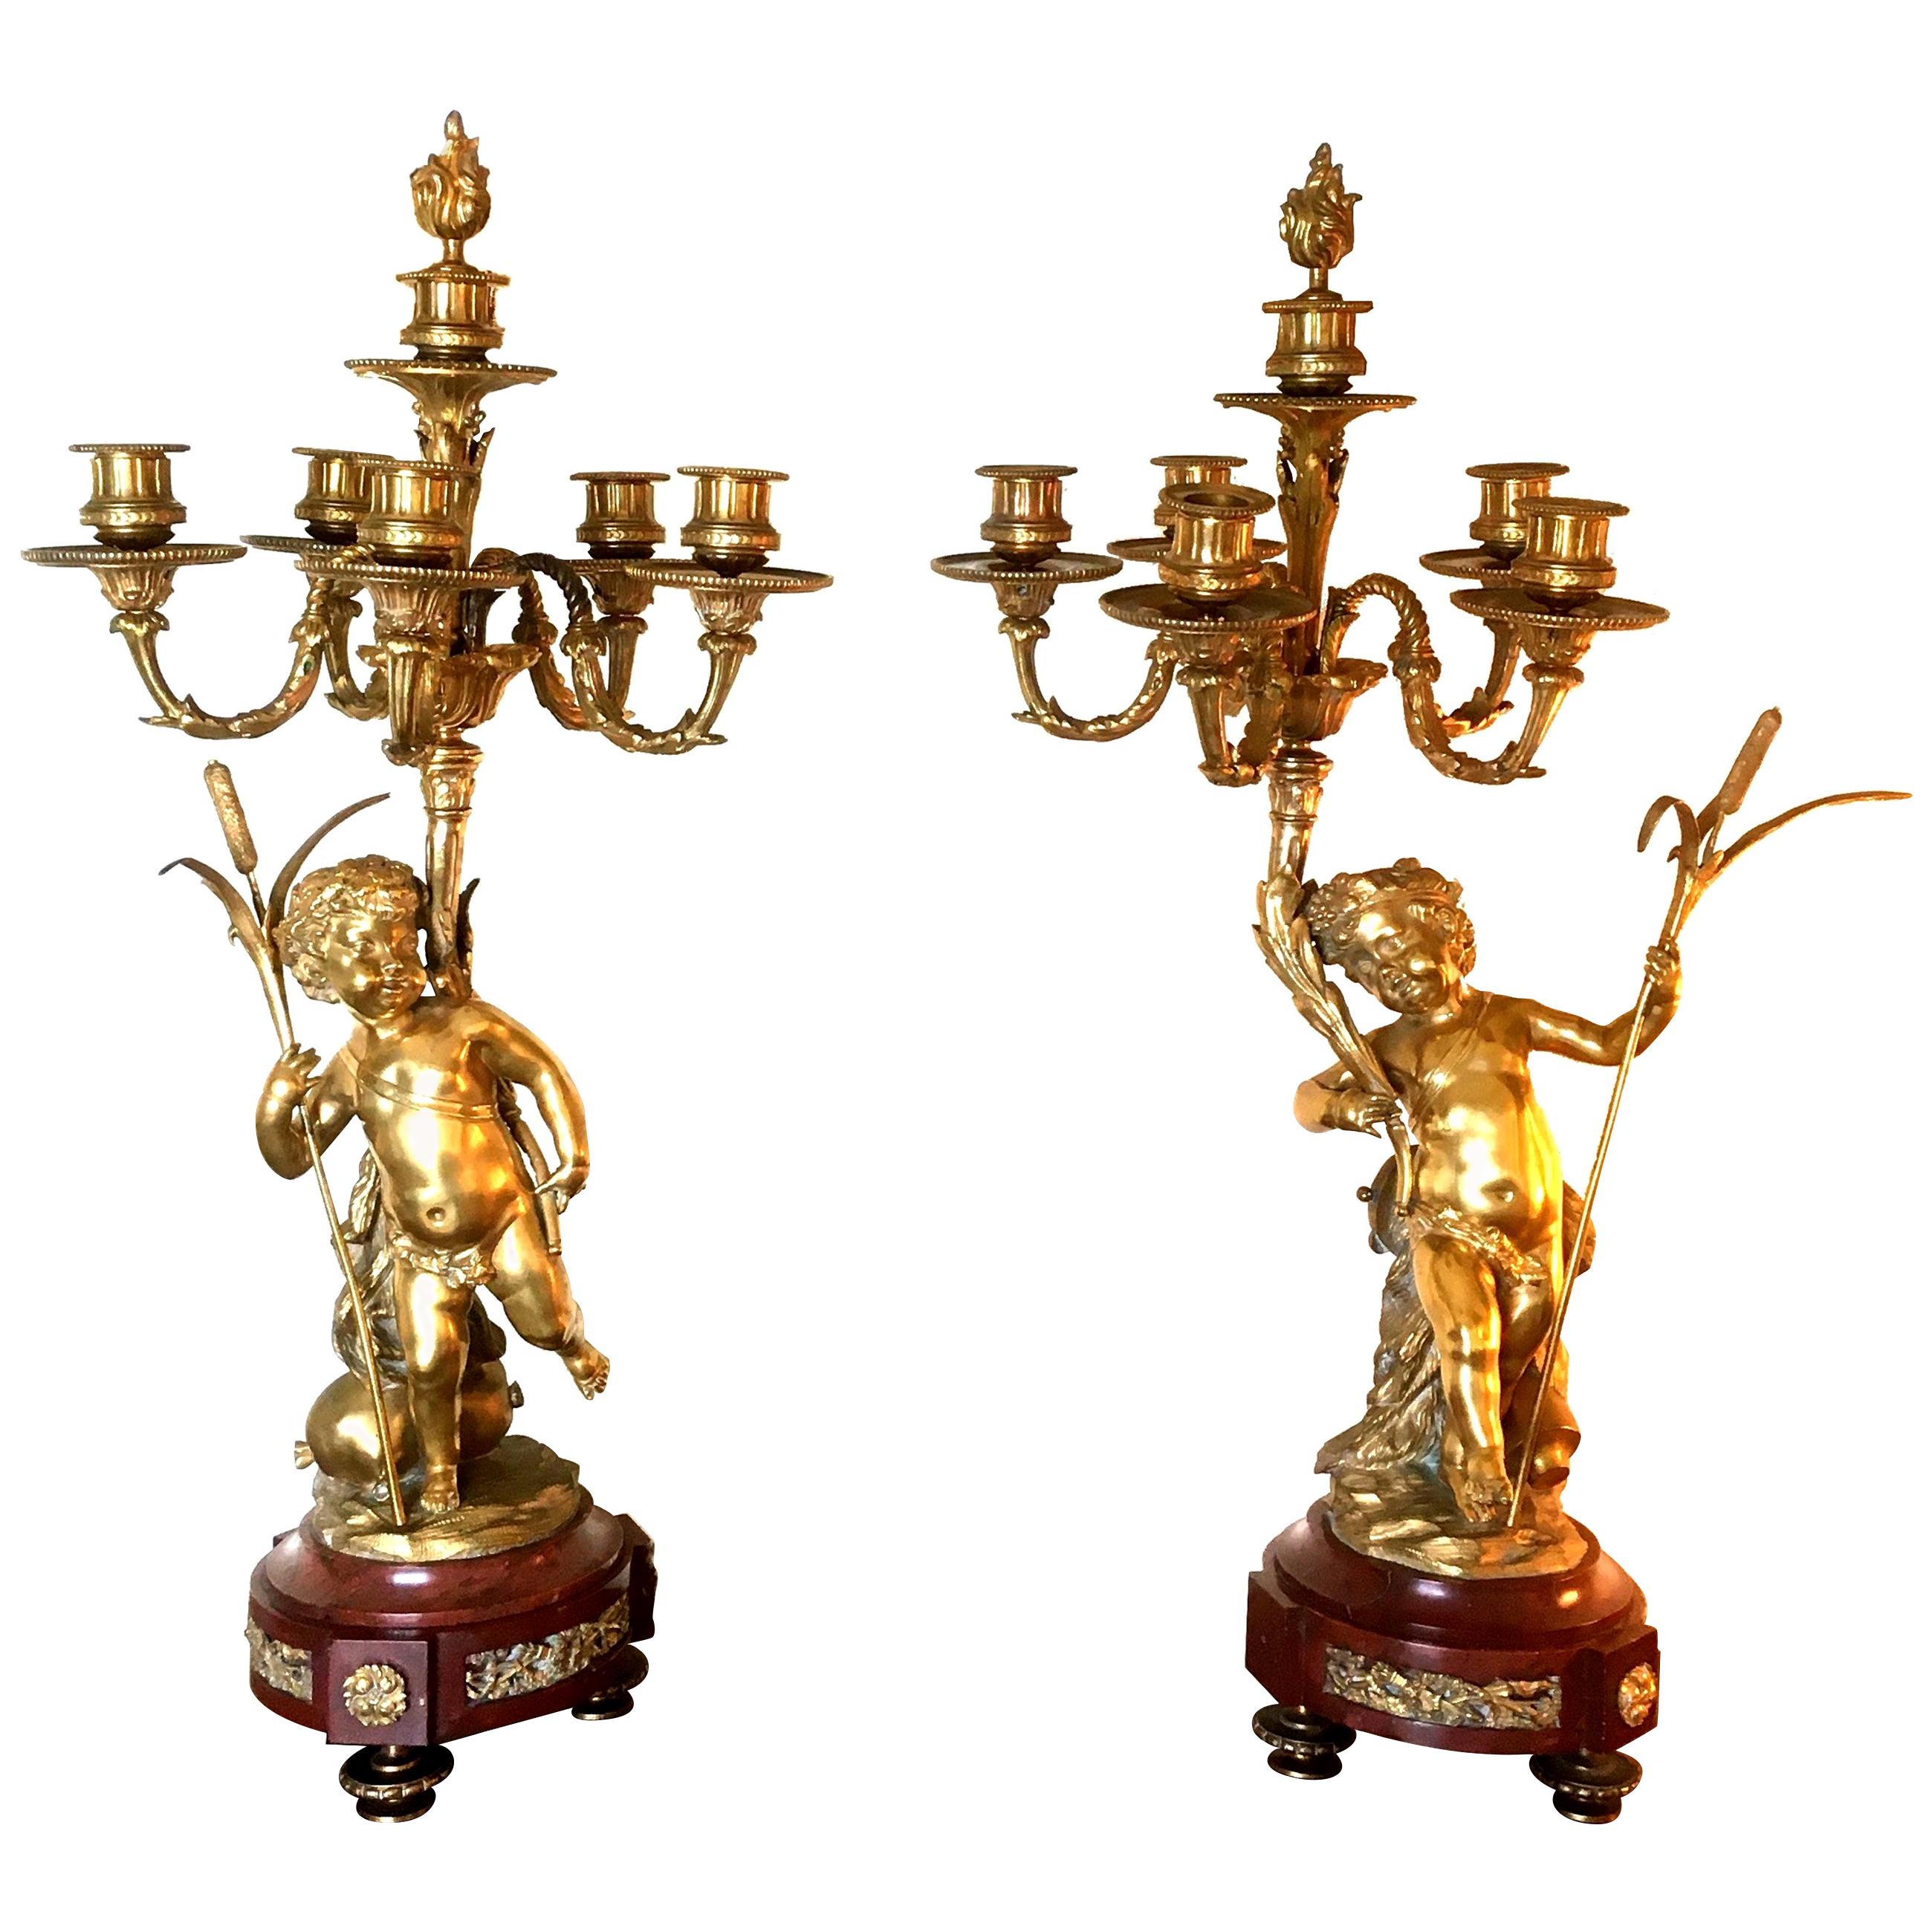 CLODION - French Pair of Candelabra Ormolu & Red Marble with Putti - 19th France